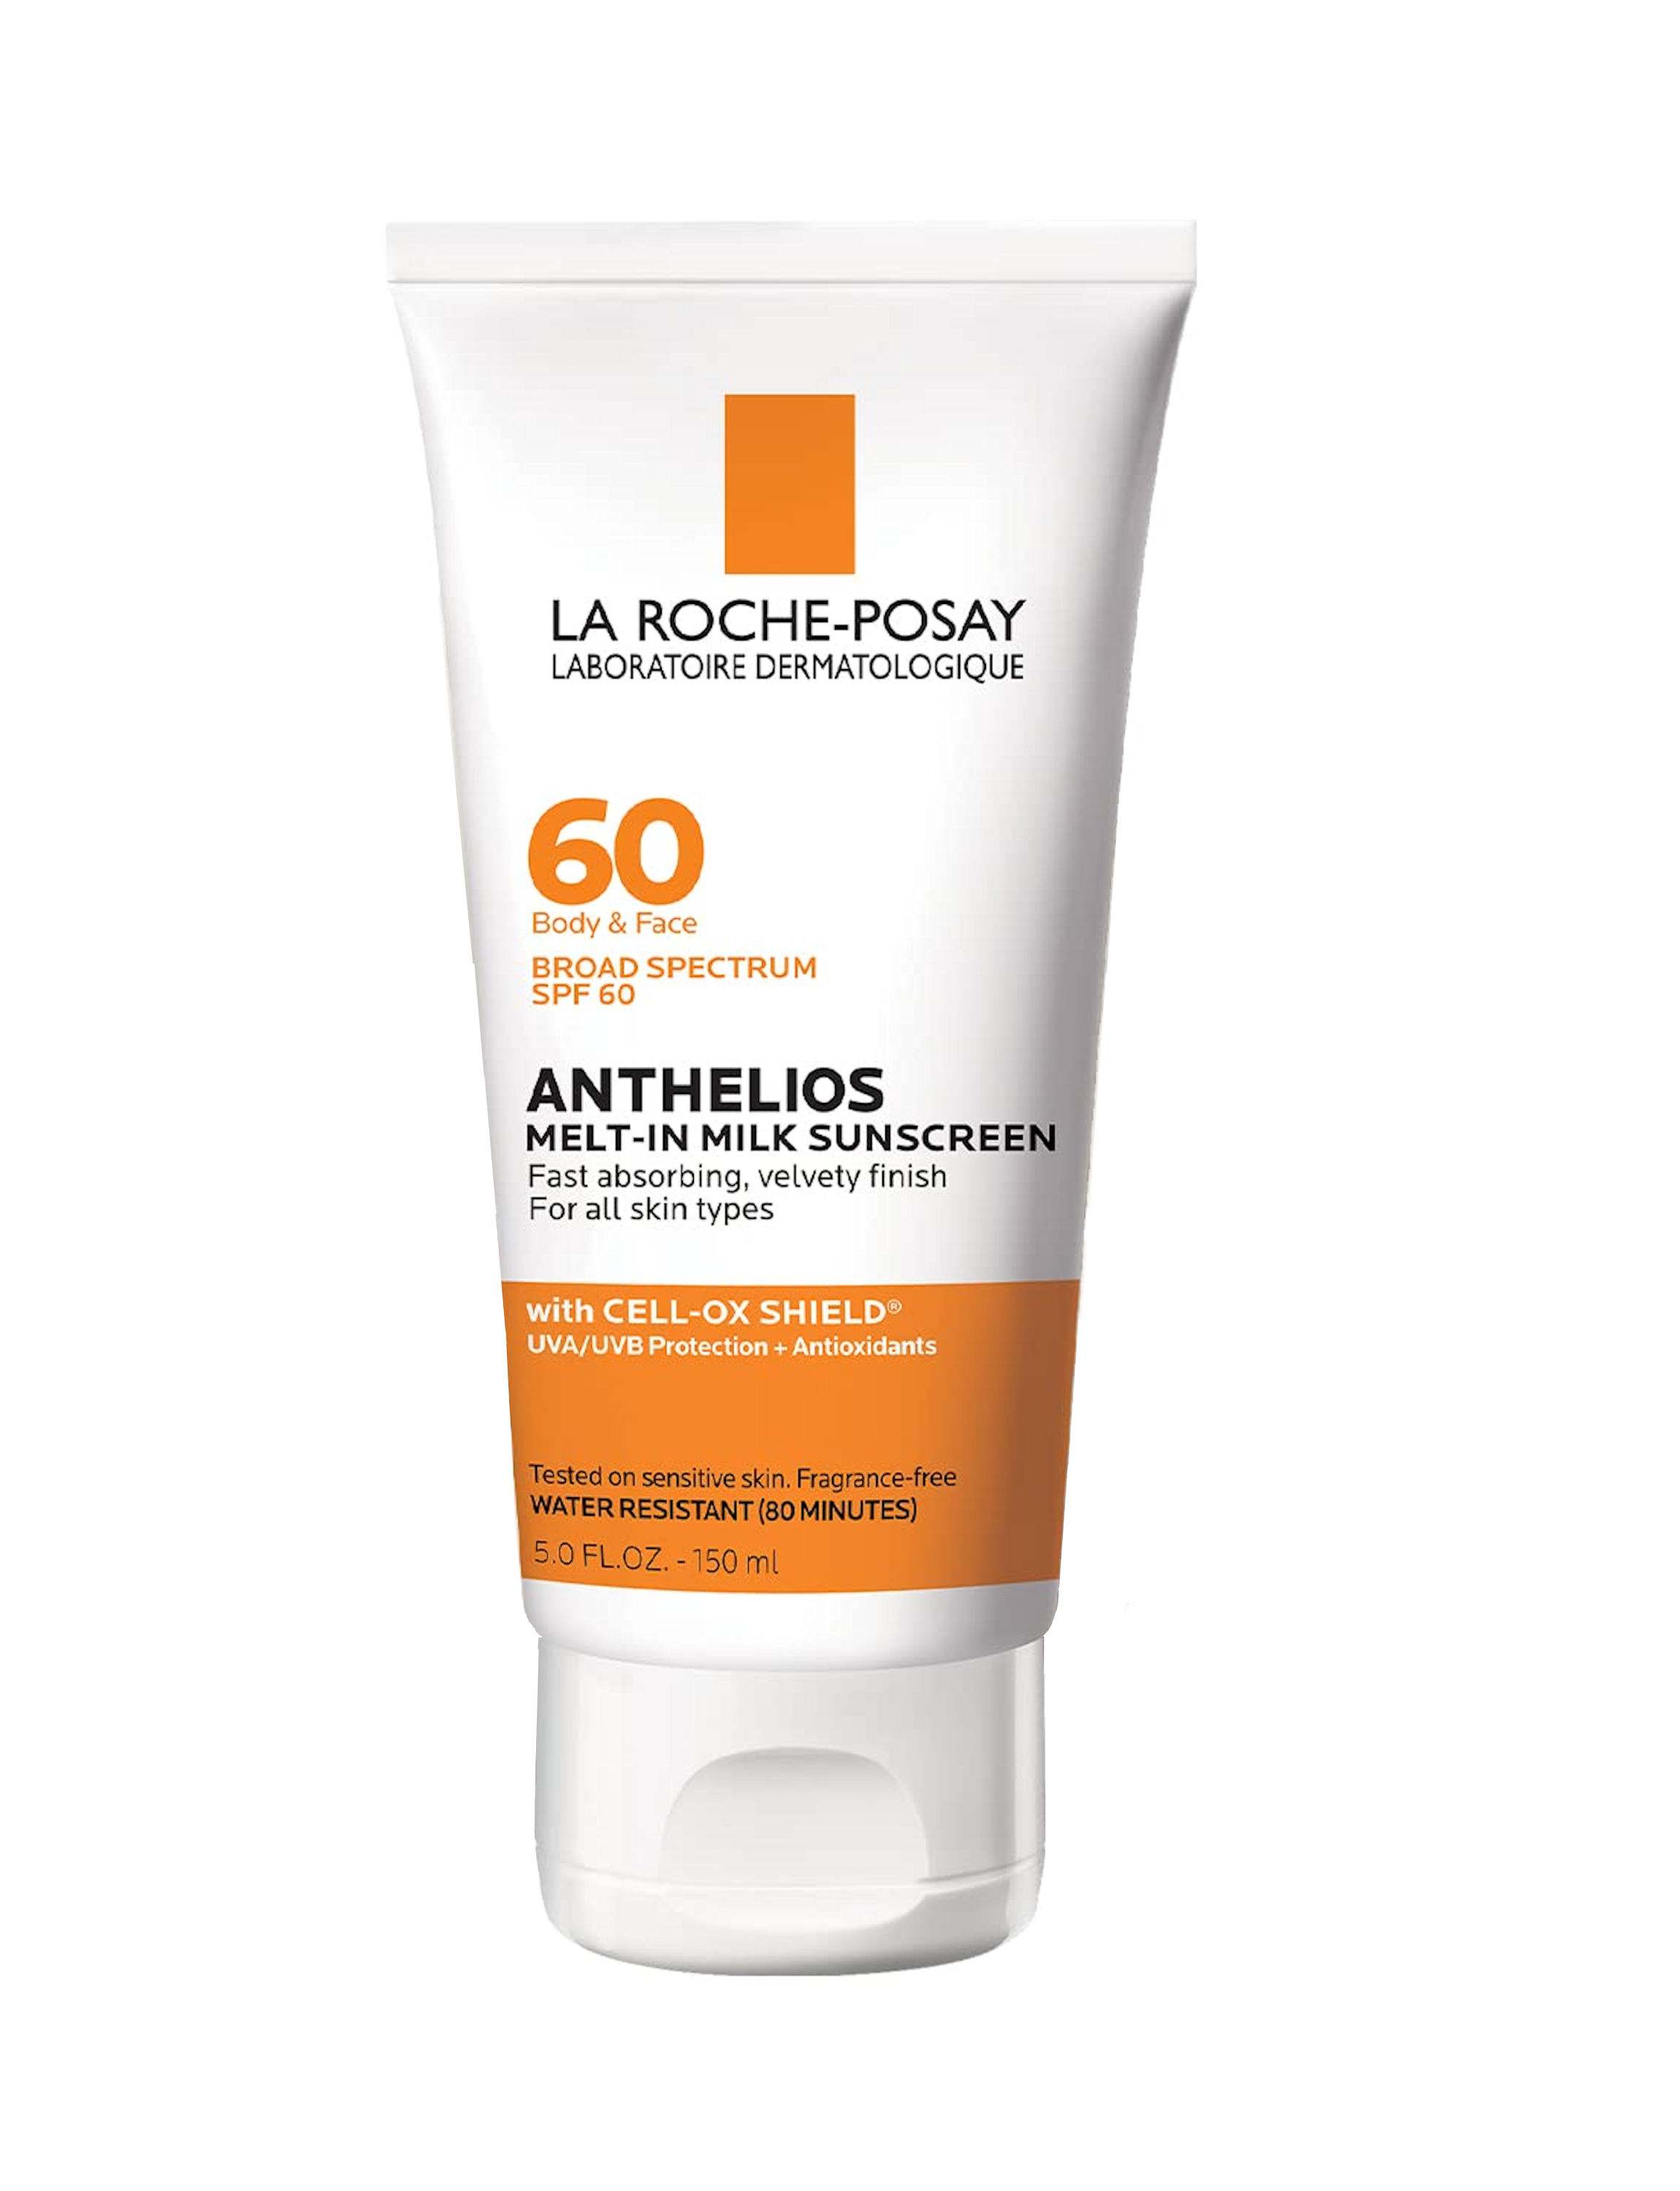 La Roche-Posay Anthelios Melt-In Milk Sunscreen SPF60 for Body & Face 5.0 fl. oz. (150ml) - image 1 of 3